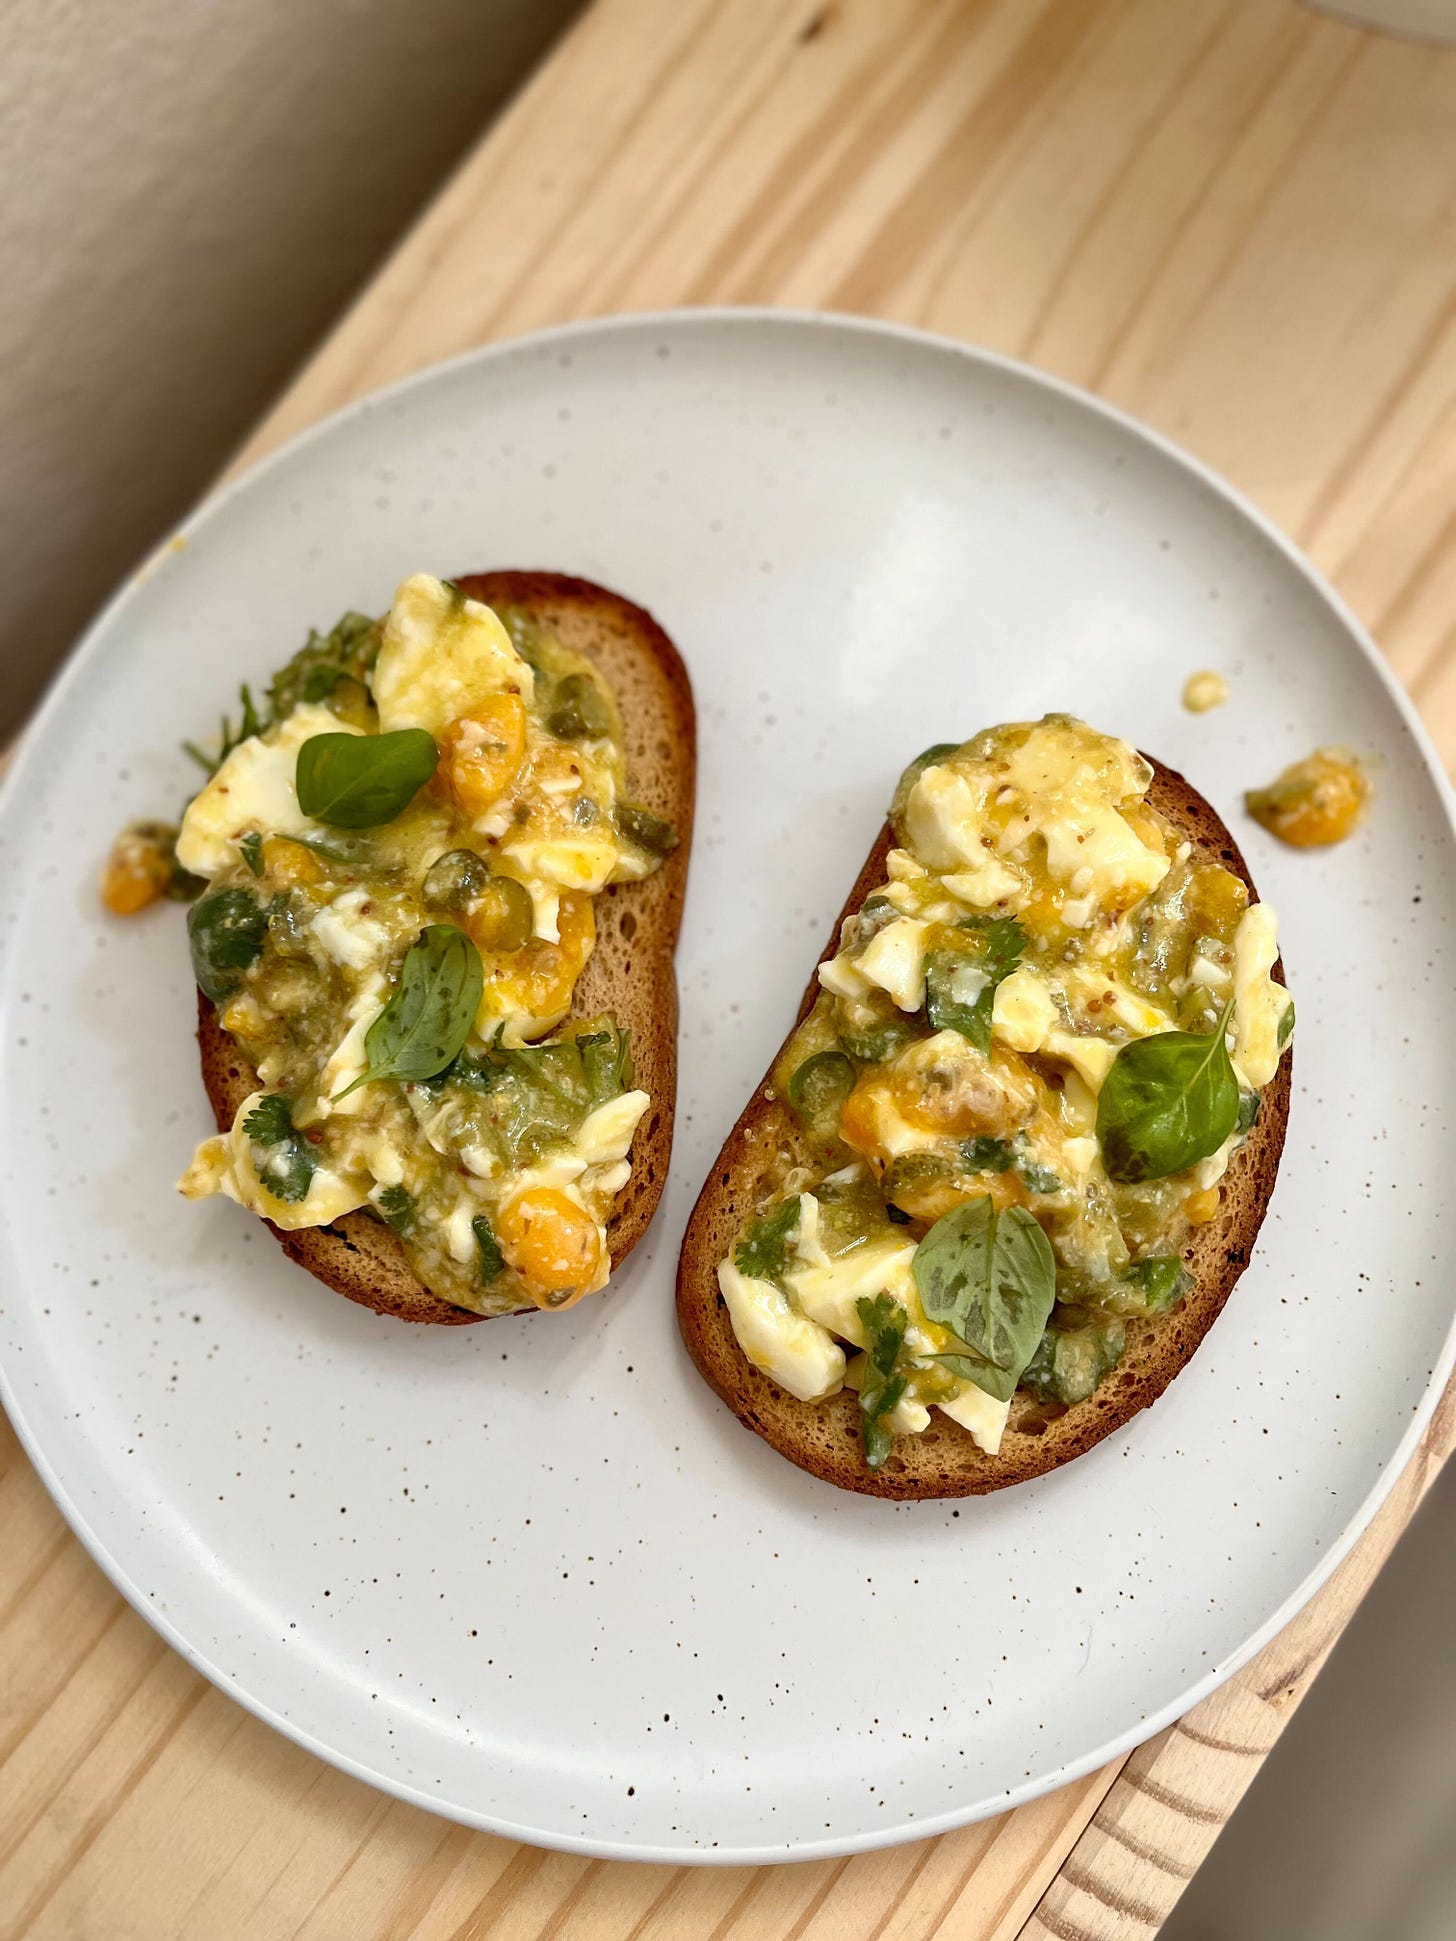 egg salad with greens on toast